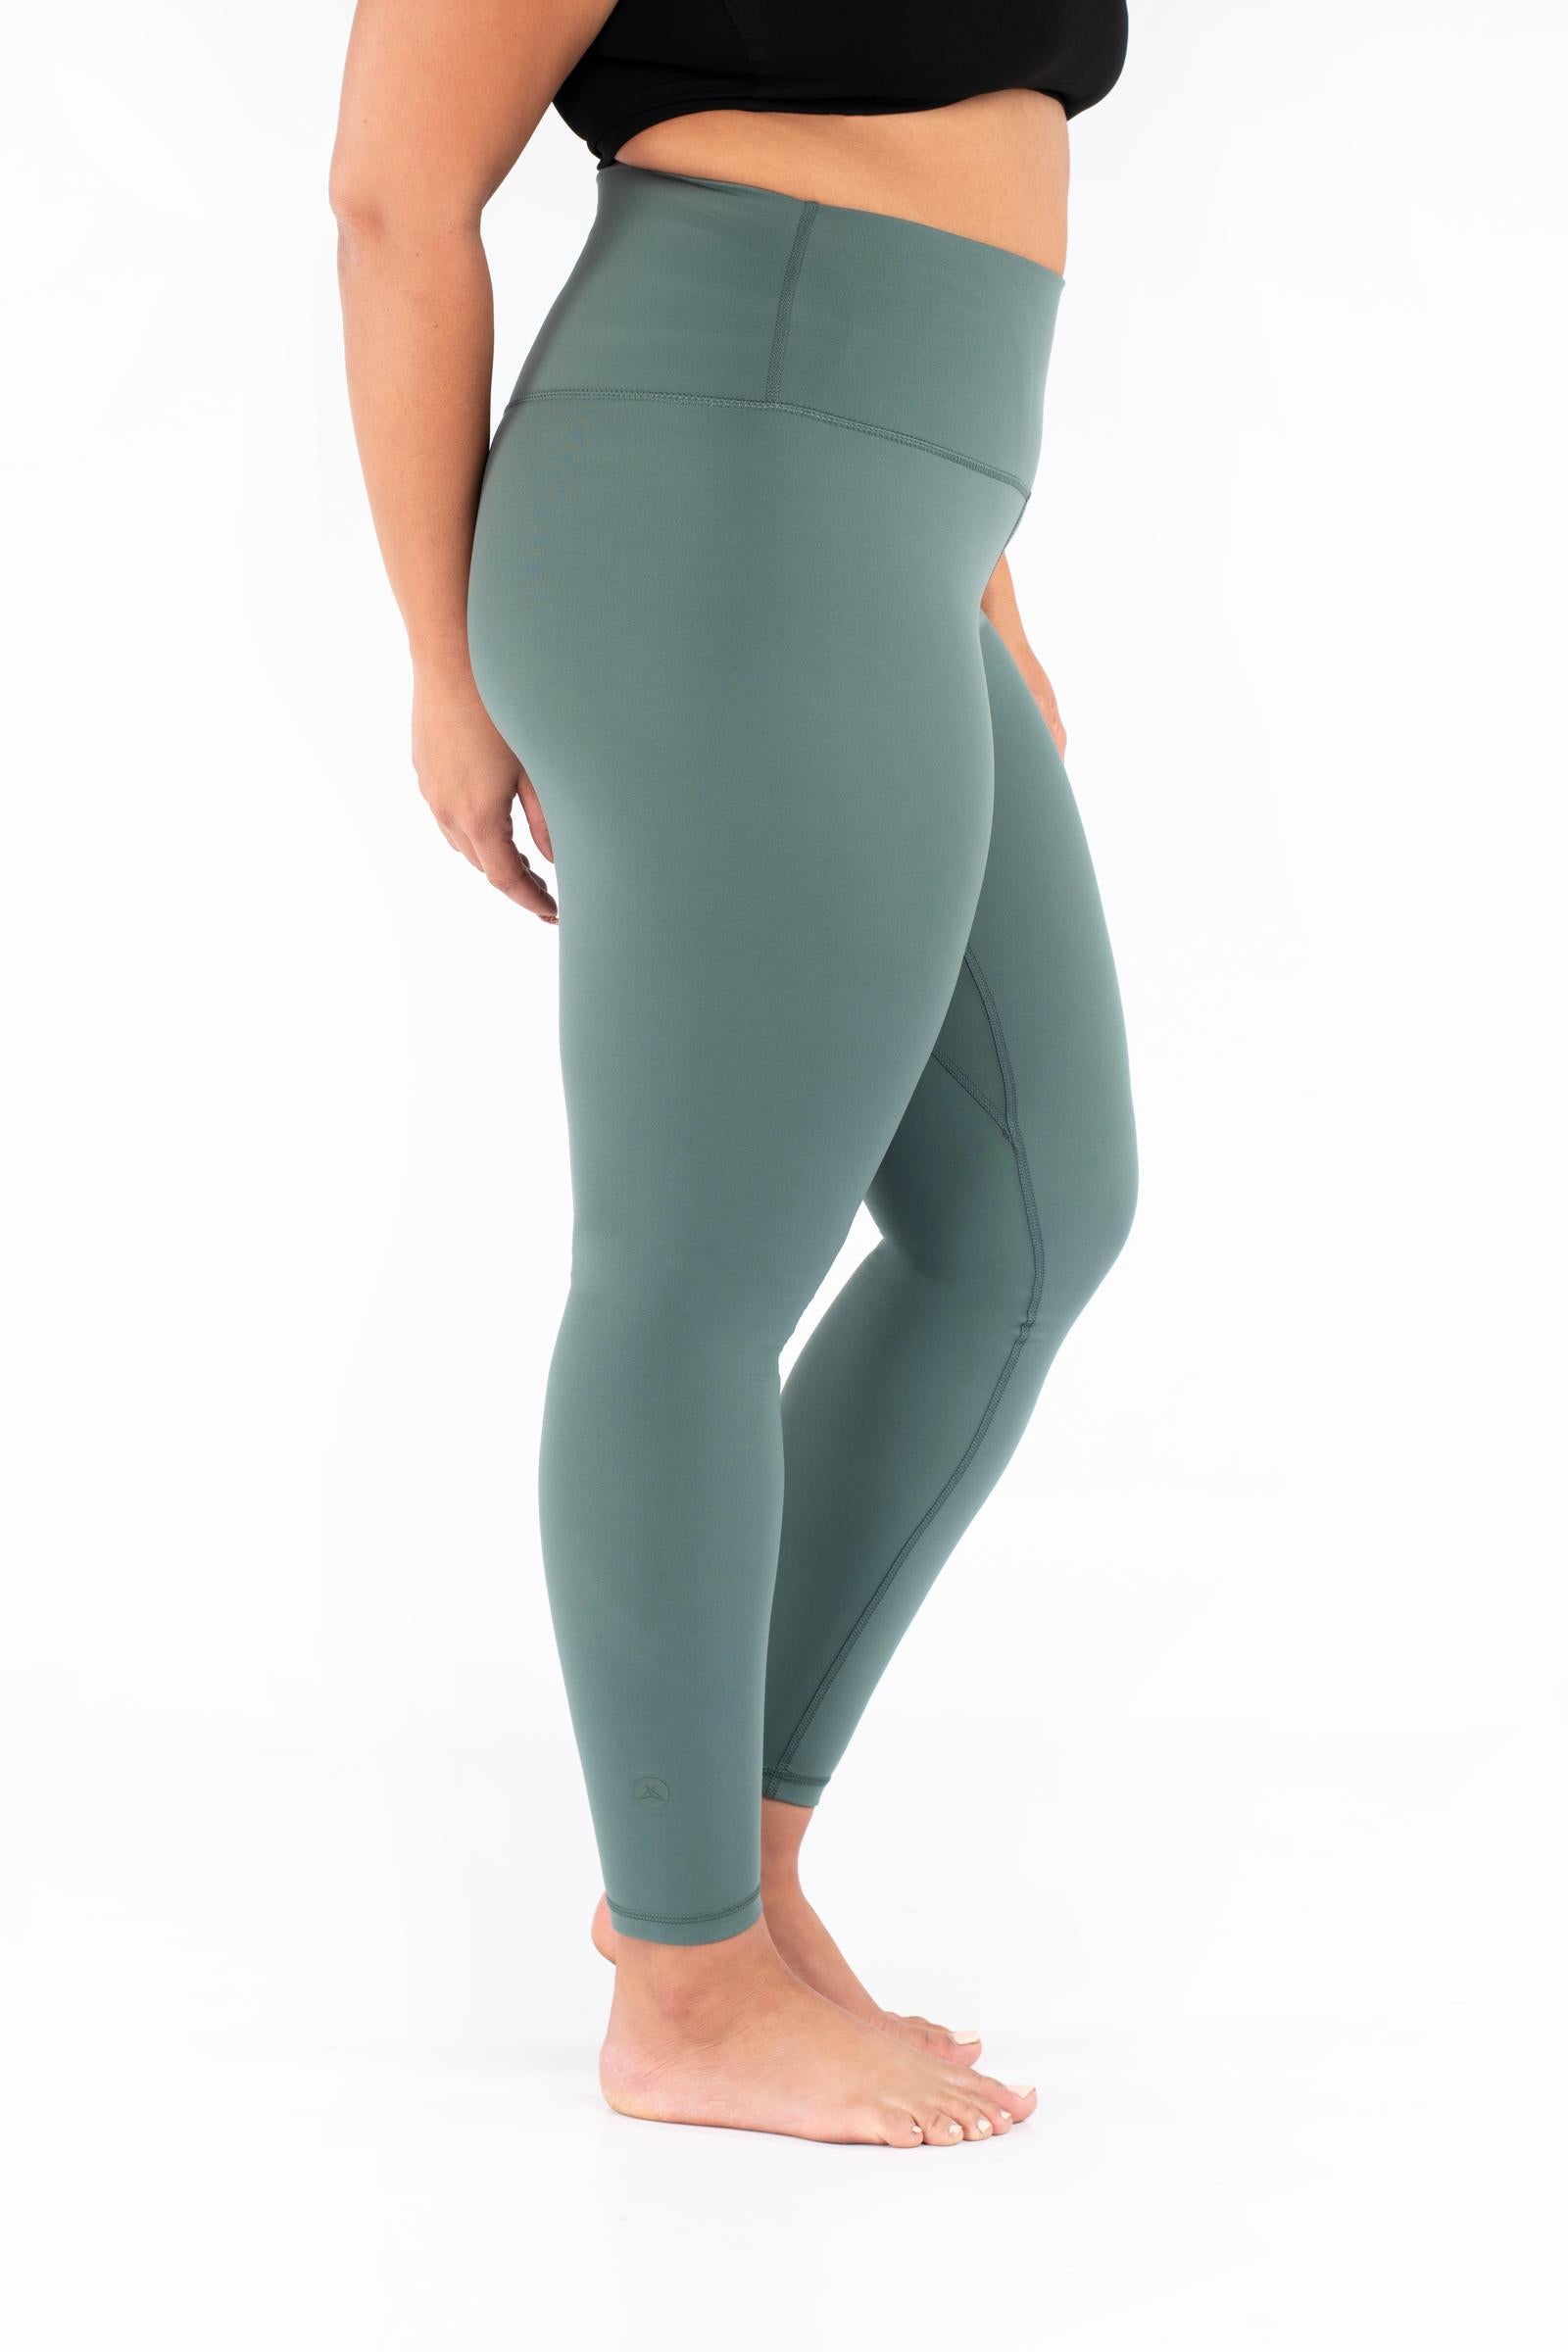 Free Leggings - Just Pay Shipping